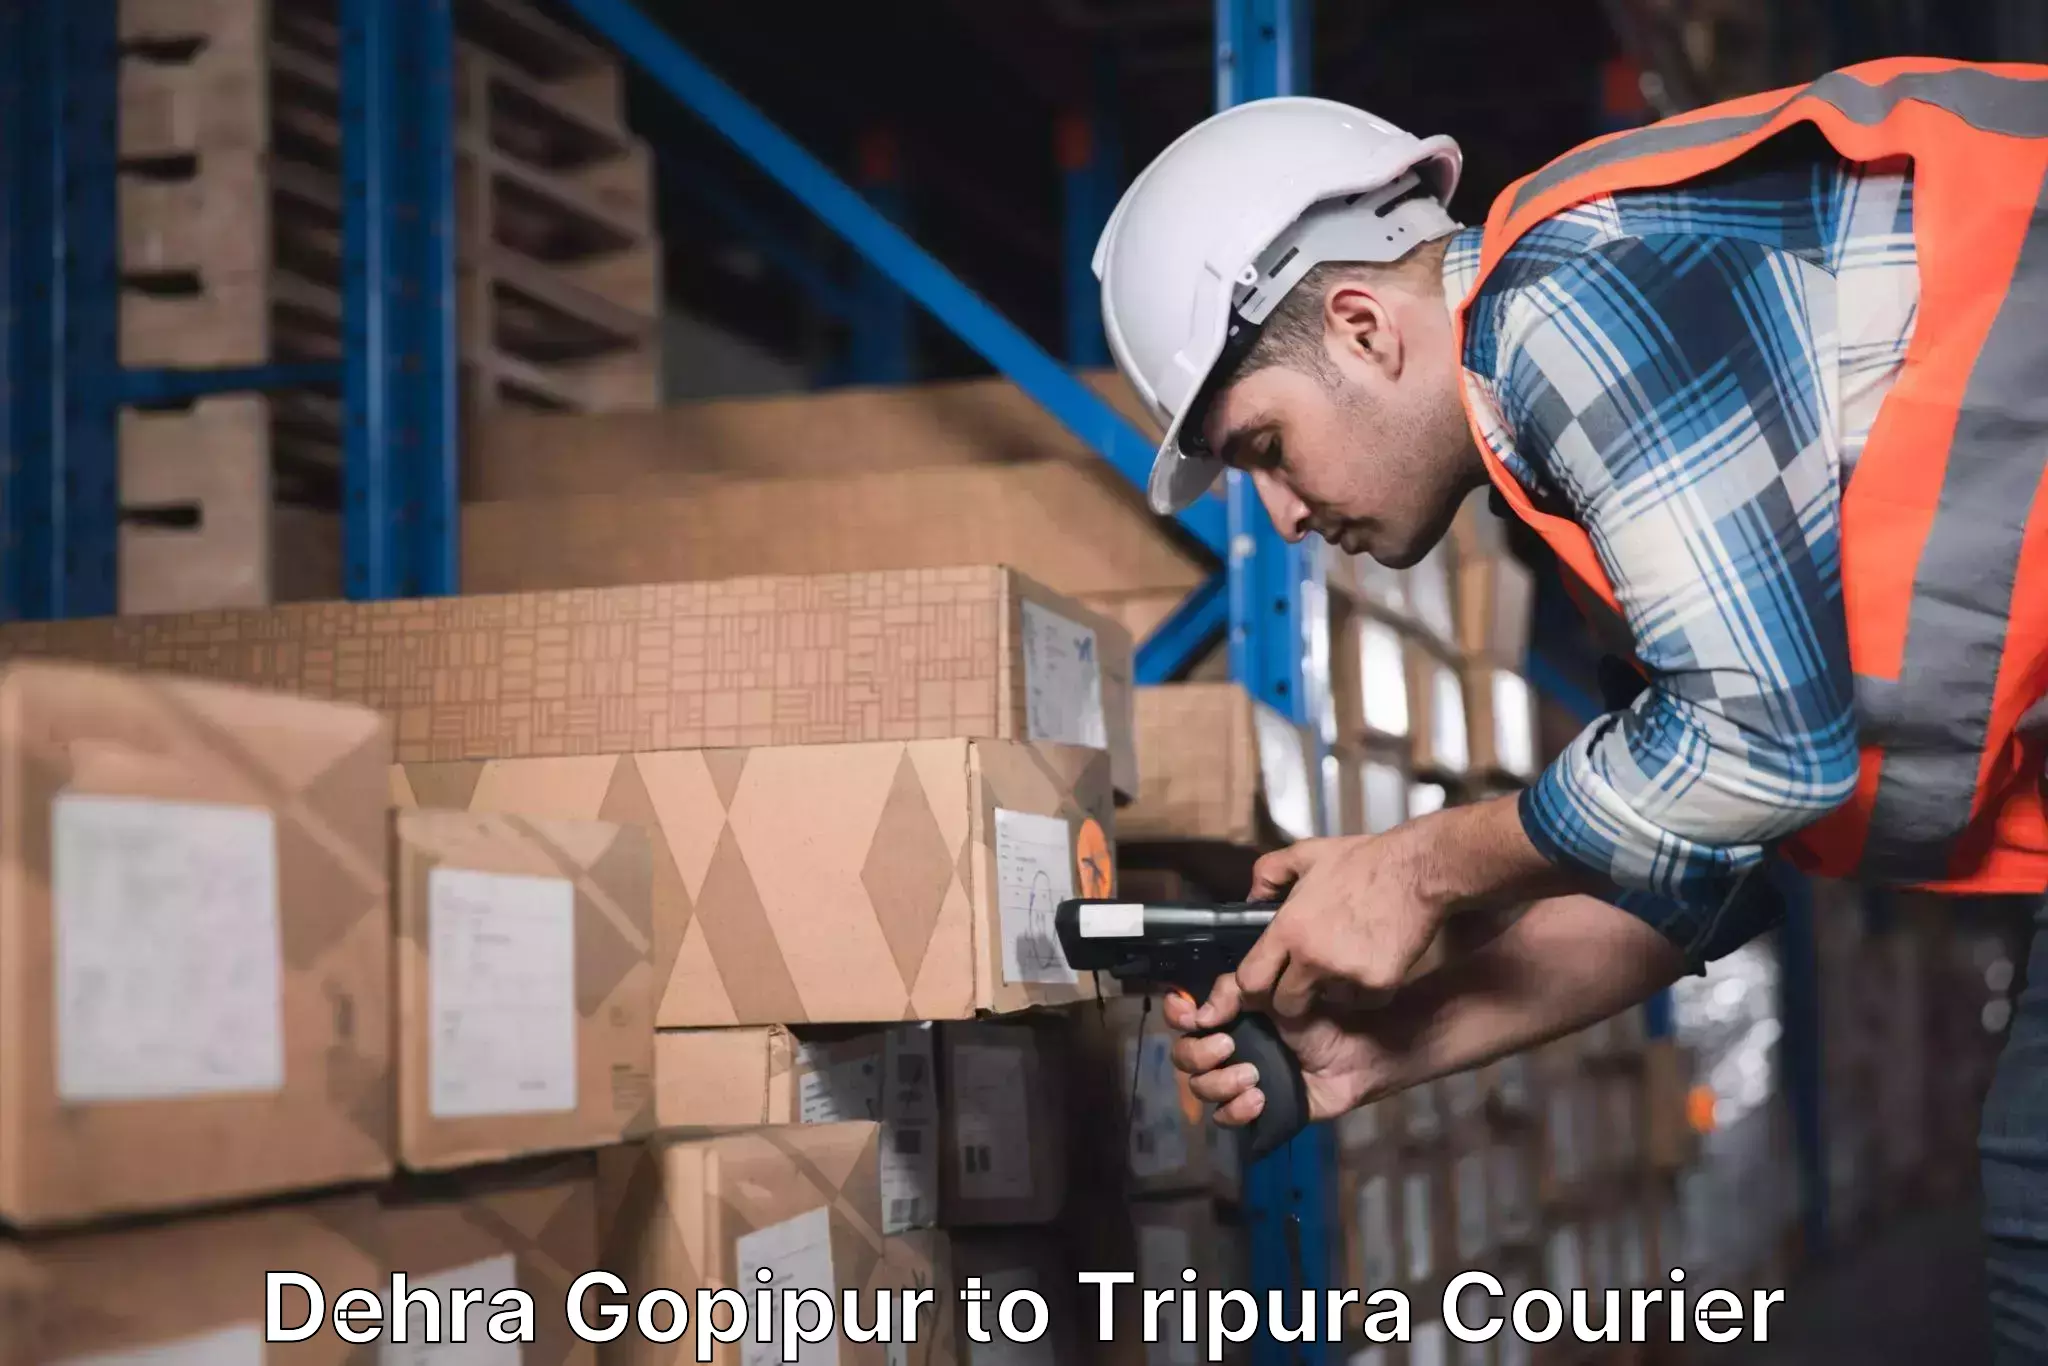 Automated shipping Dehra Gopipur to Udaipur Tripura